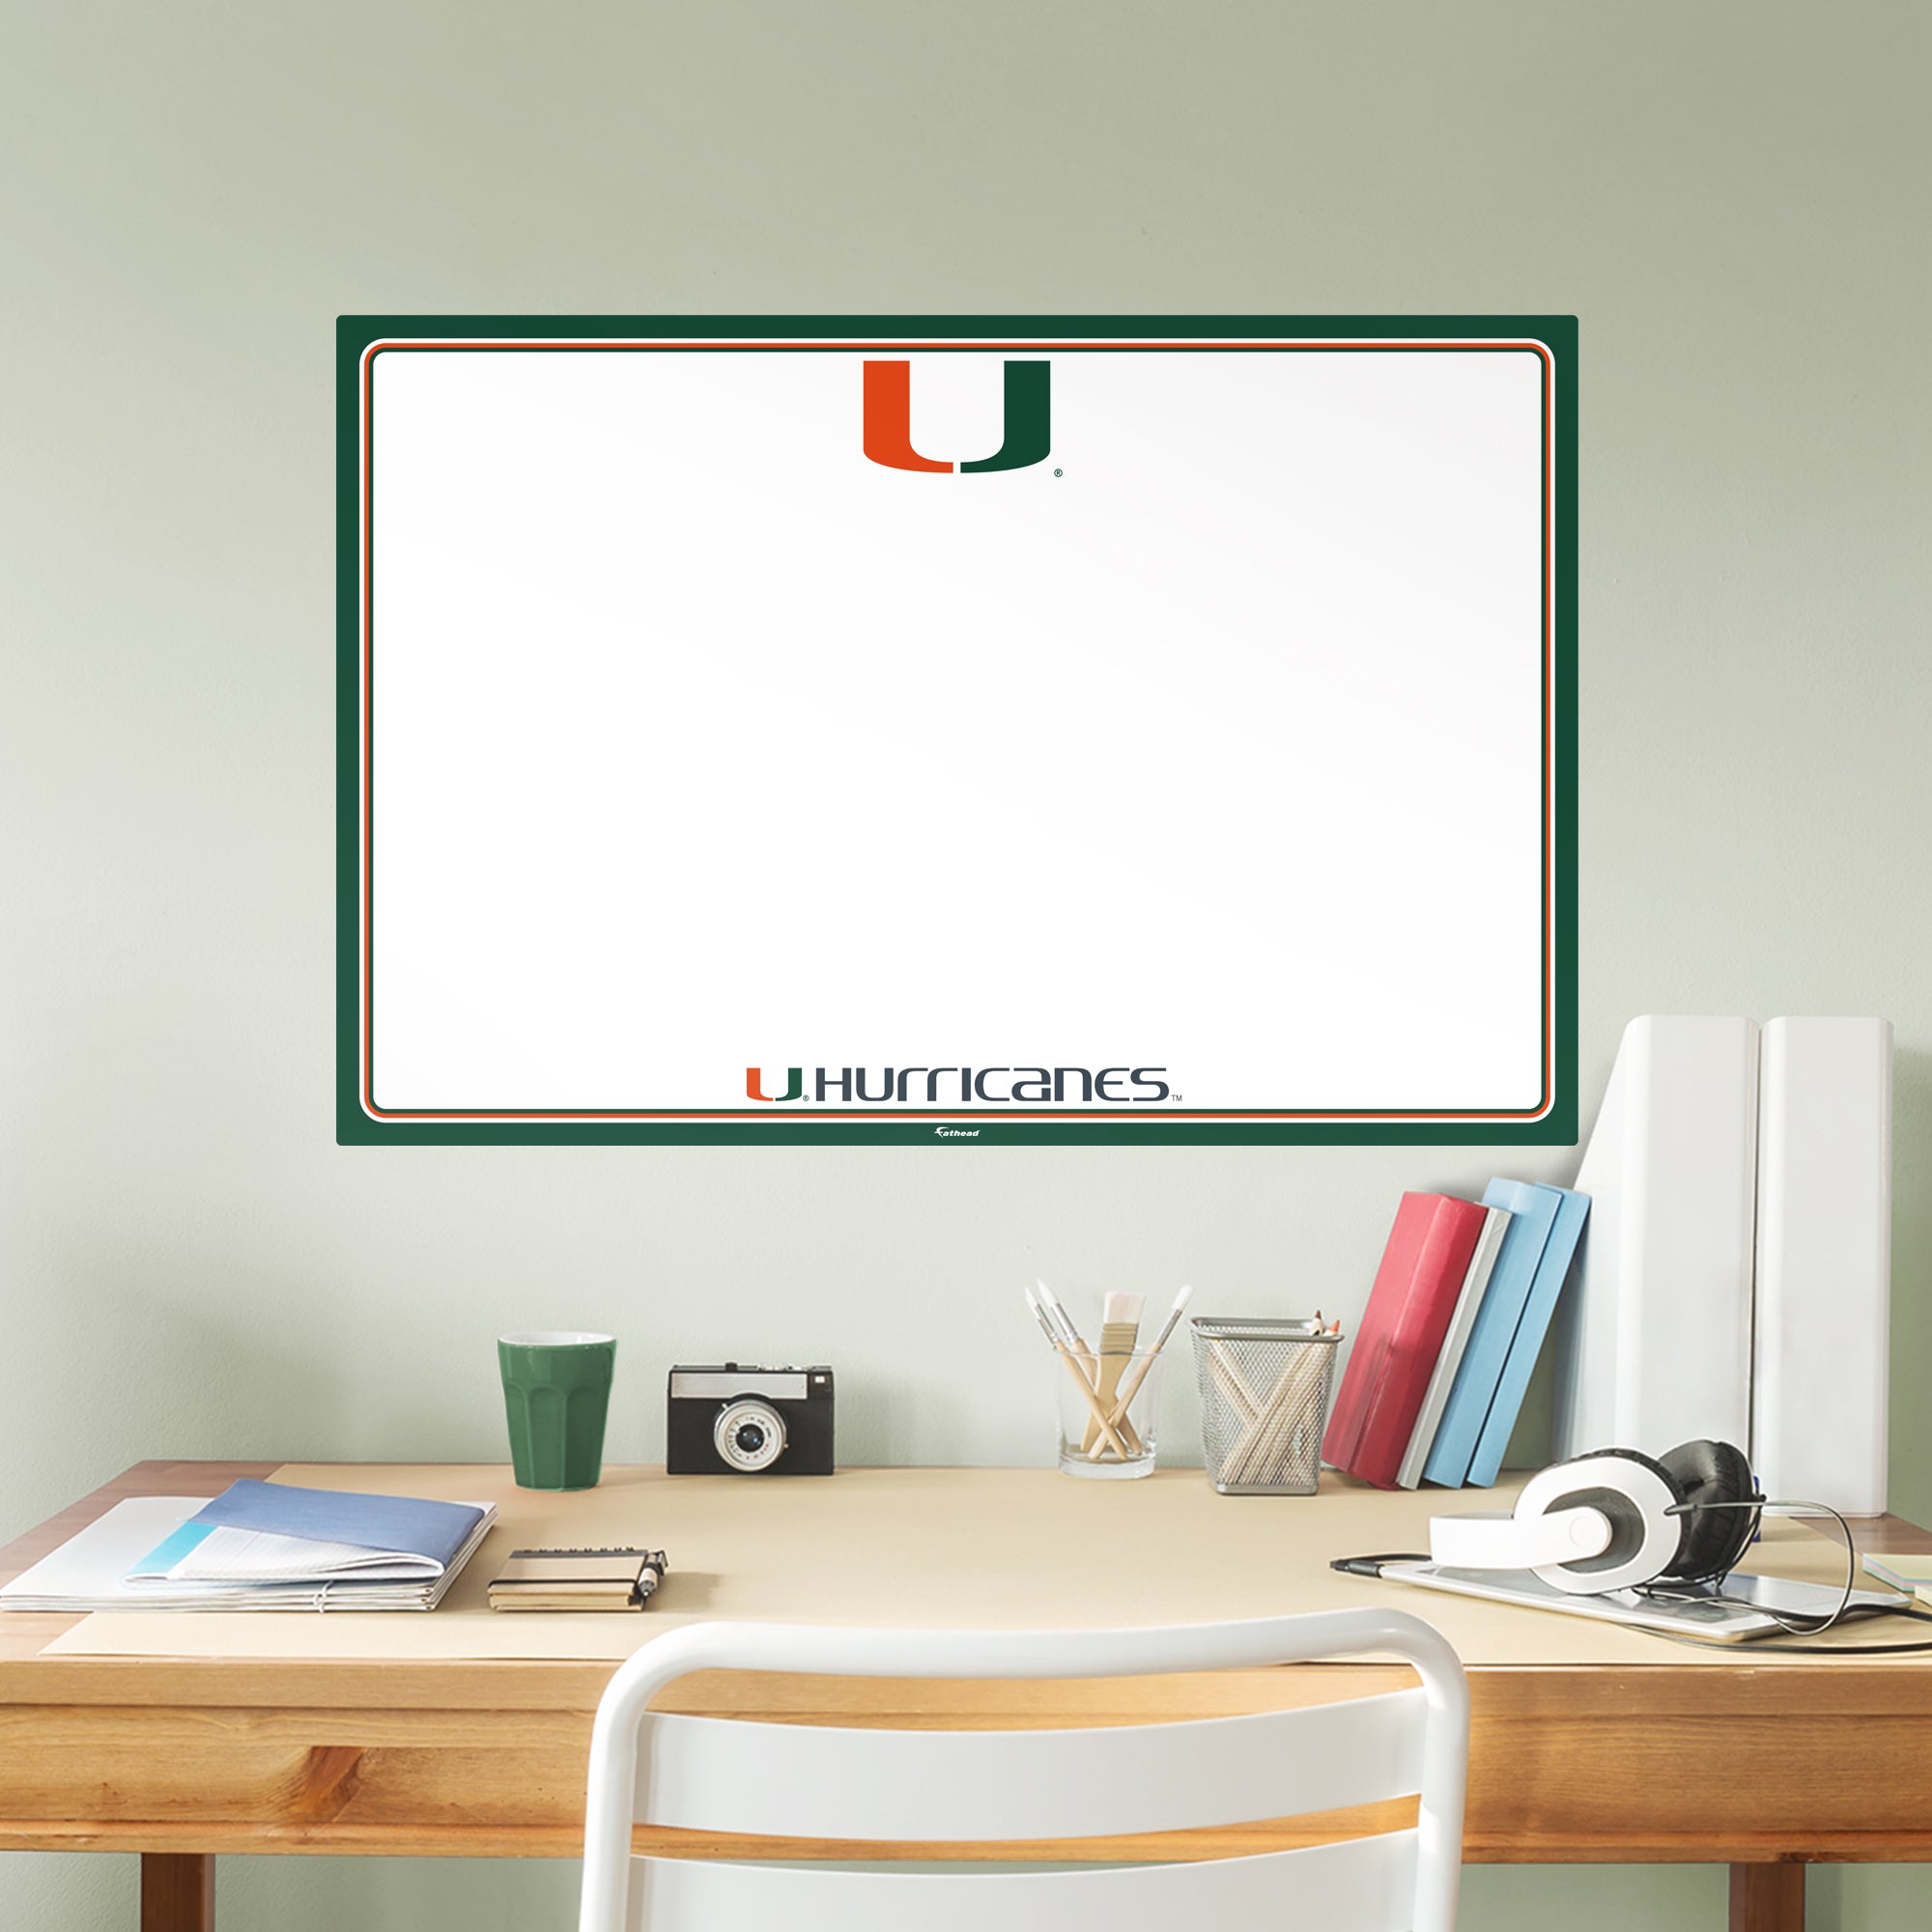 Miami Hurricanes: Dry Erase Whiteboard - X-Large Officially Licensed NCAA Removable Wall Decal XL by Fathead | Vinyl